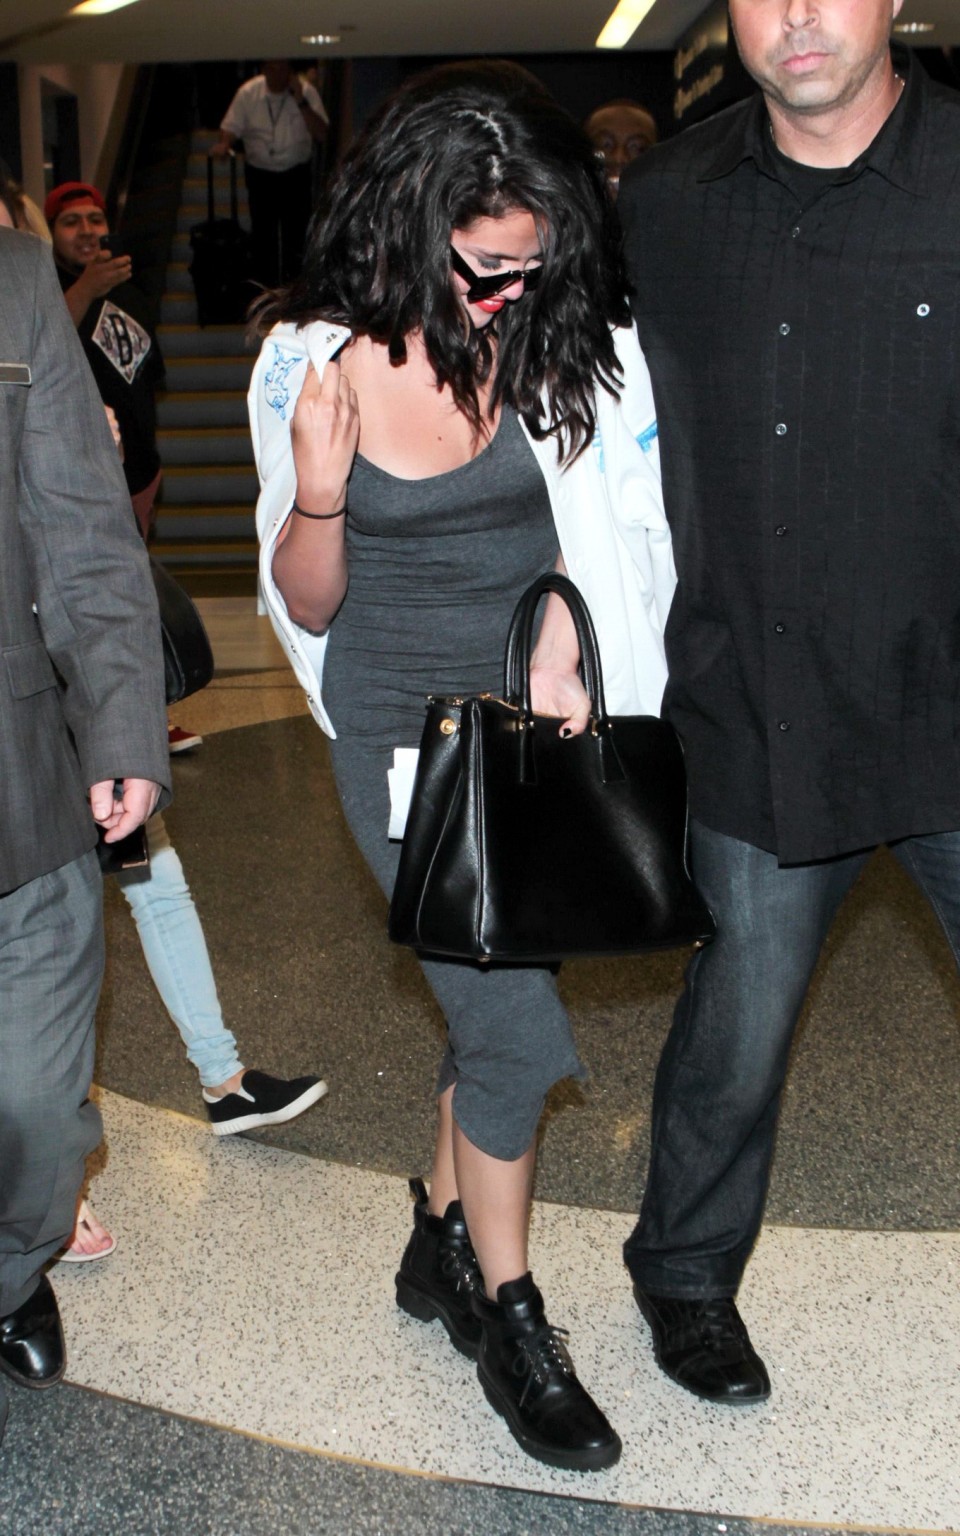 Selena Gomez busty wearing a low cut dress at LAX Airport #75166573